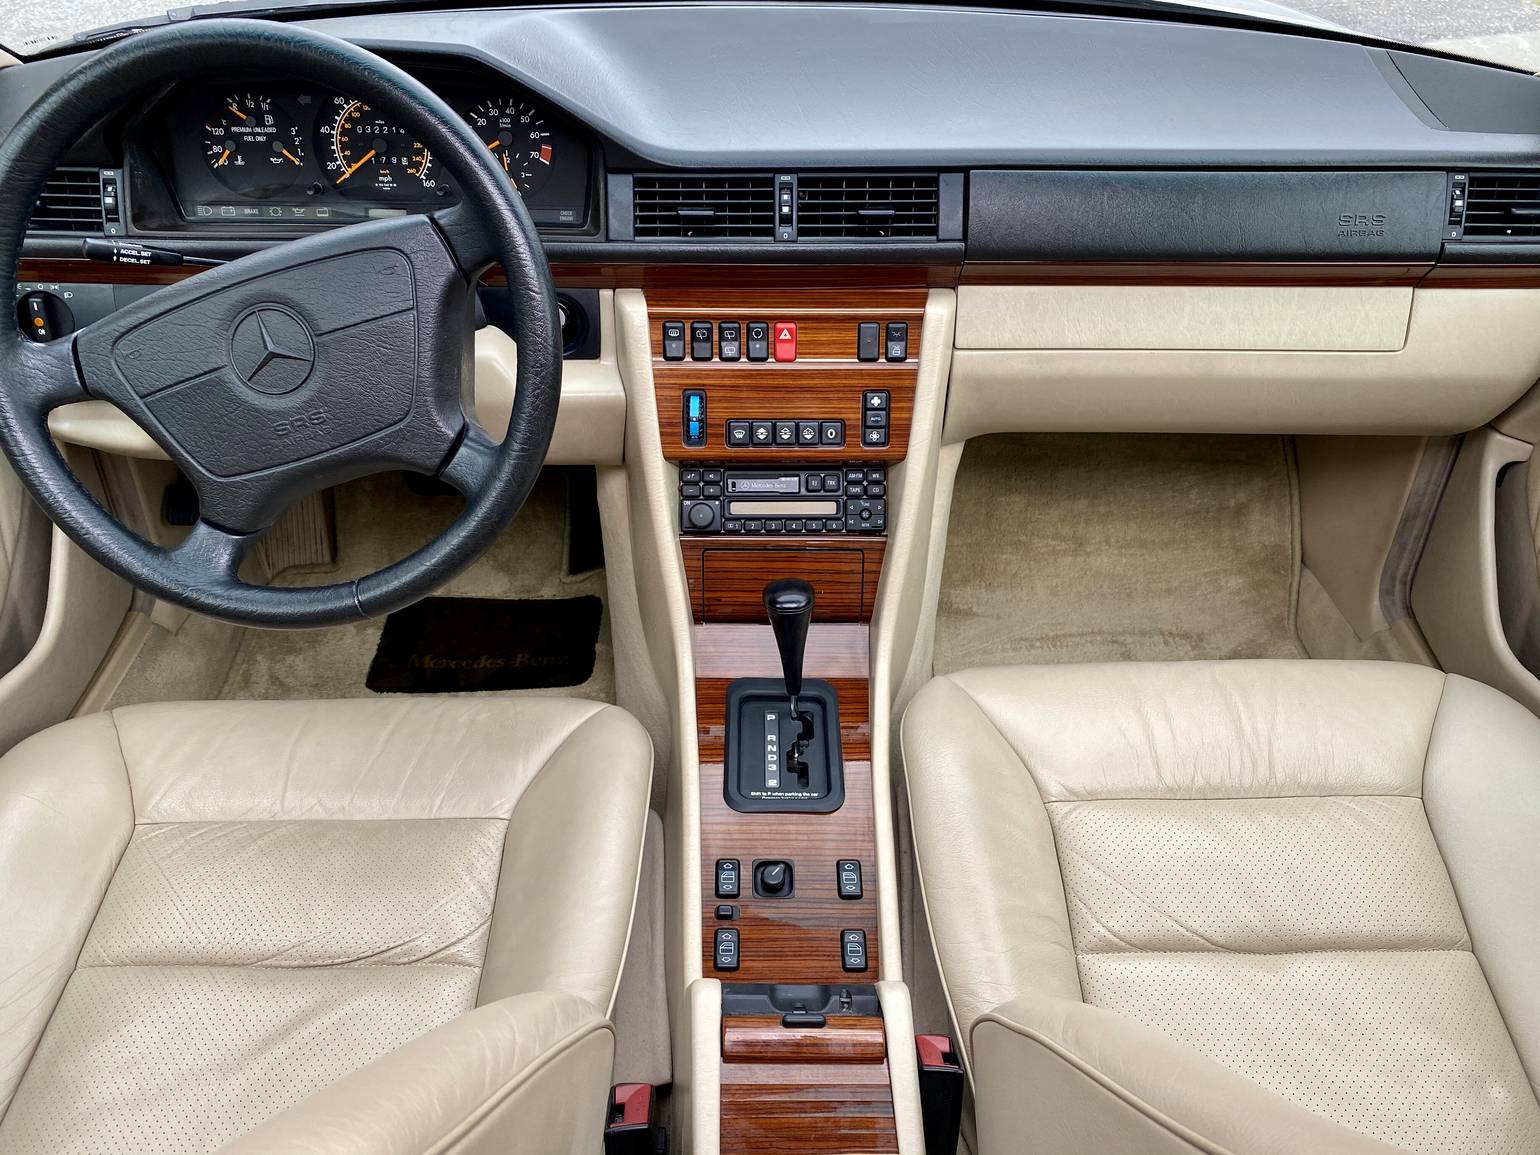 built-to-a-standard-not-to-a-price-32k-mile-1995-mercedes-benz-e320-estate77959129-770-0@2X